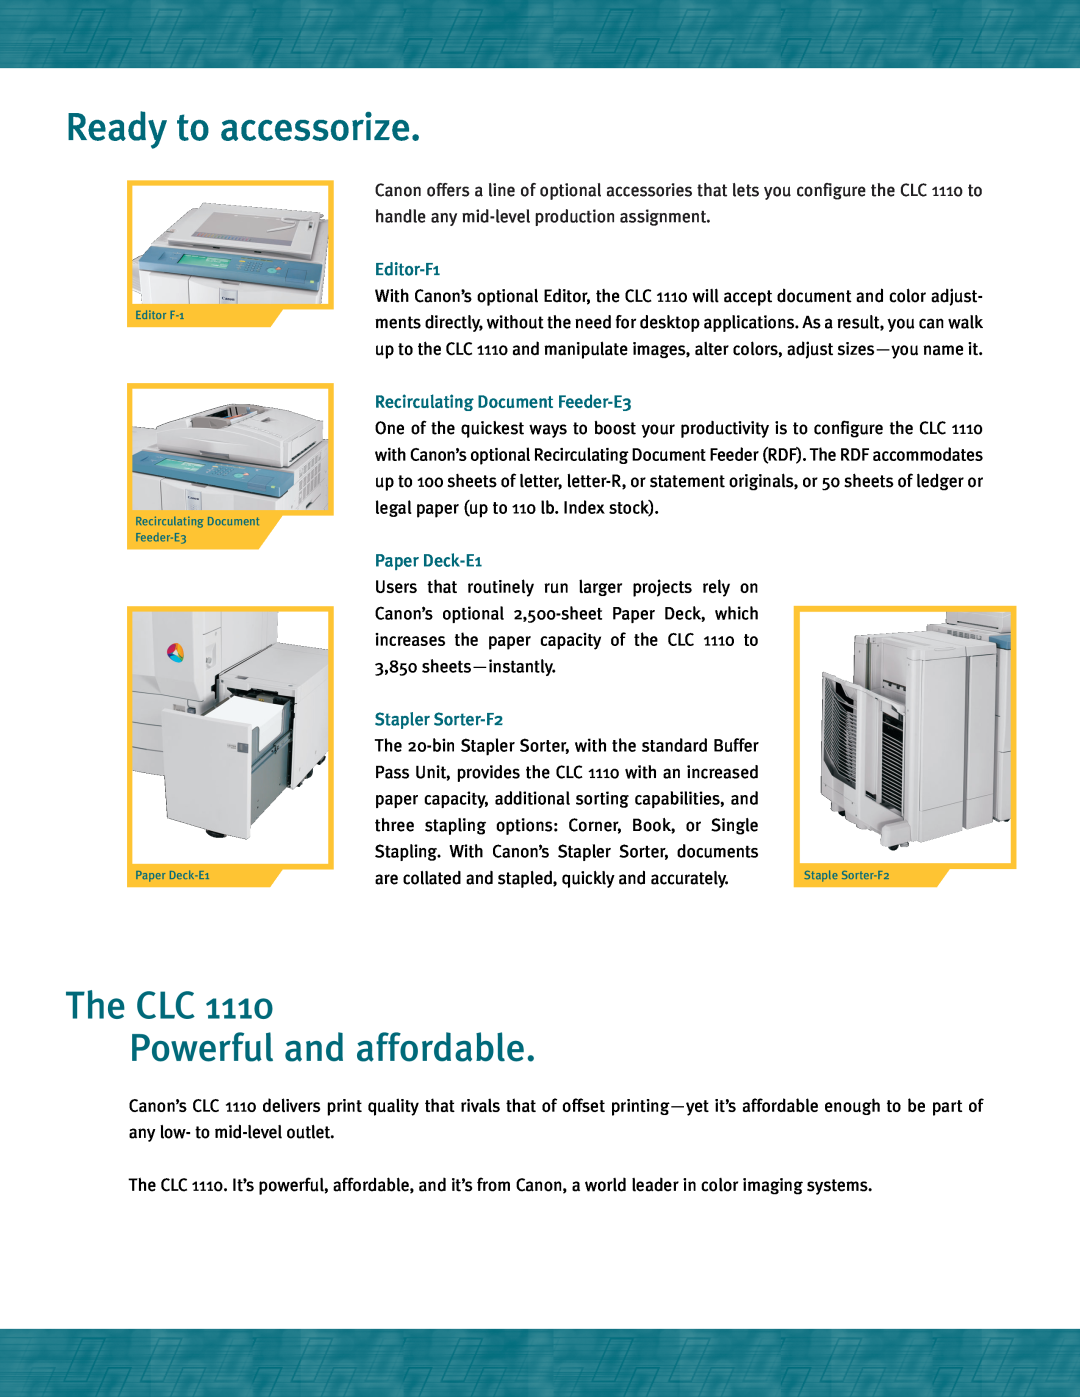 Canon CLC 1110 manual Ready to accessorize, The CLC Powerful and affordable, Editor-F1, Recirculating Document Feeder-E3 